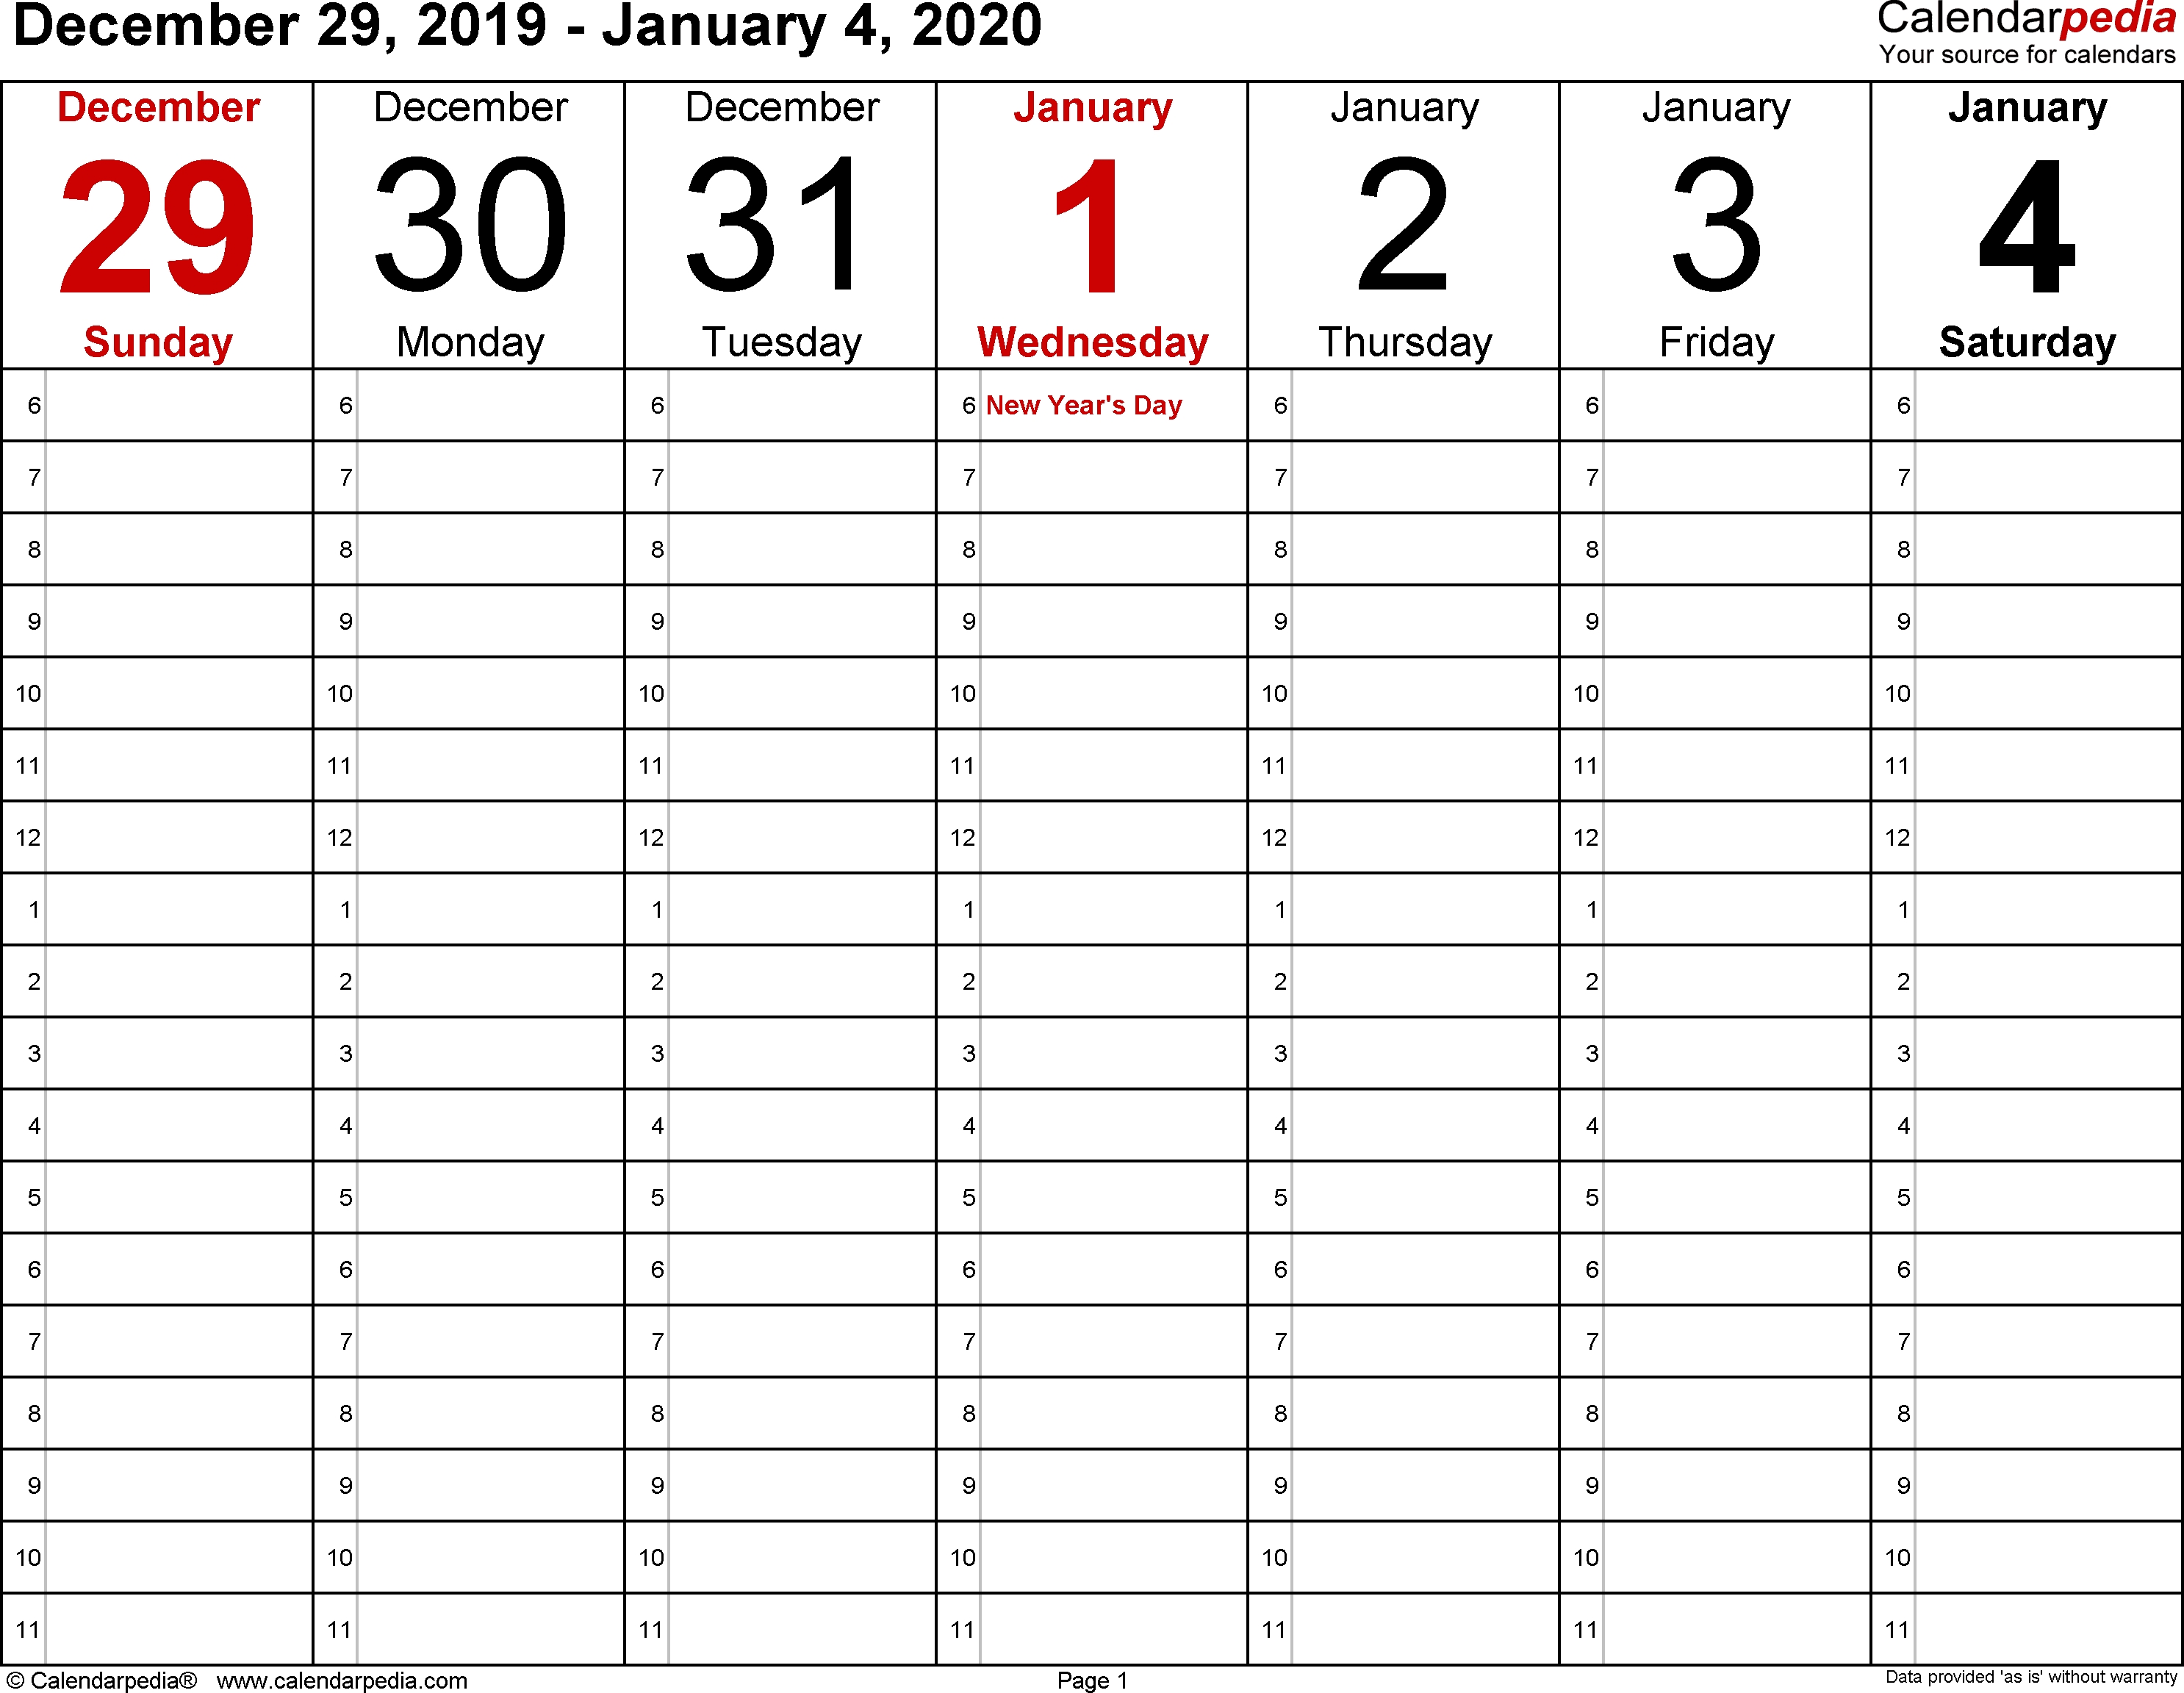 Weekly Calendar 2020 For Word - 12 Free Printable Templates-2 Page Calendar Template 2020